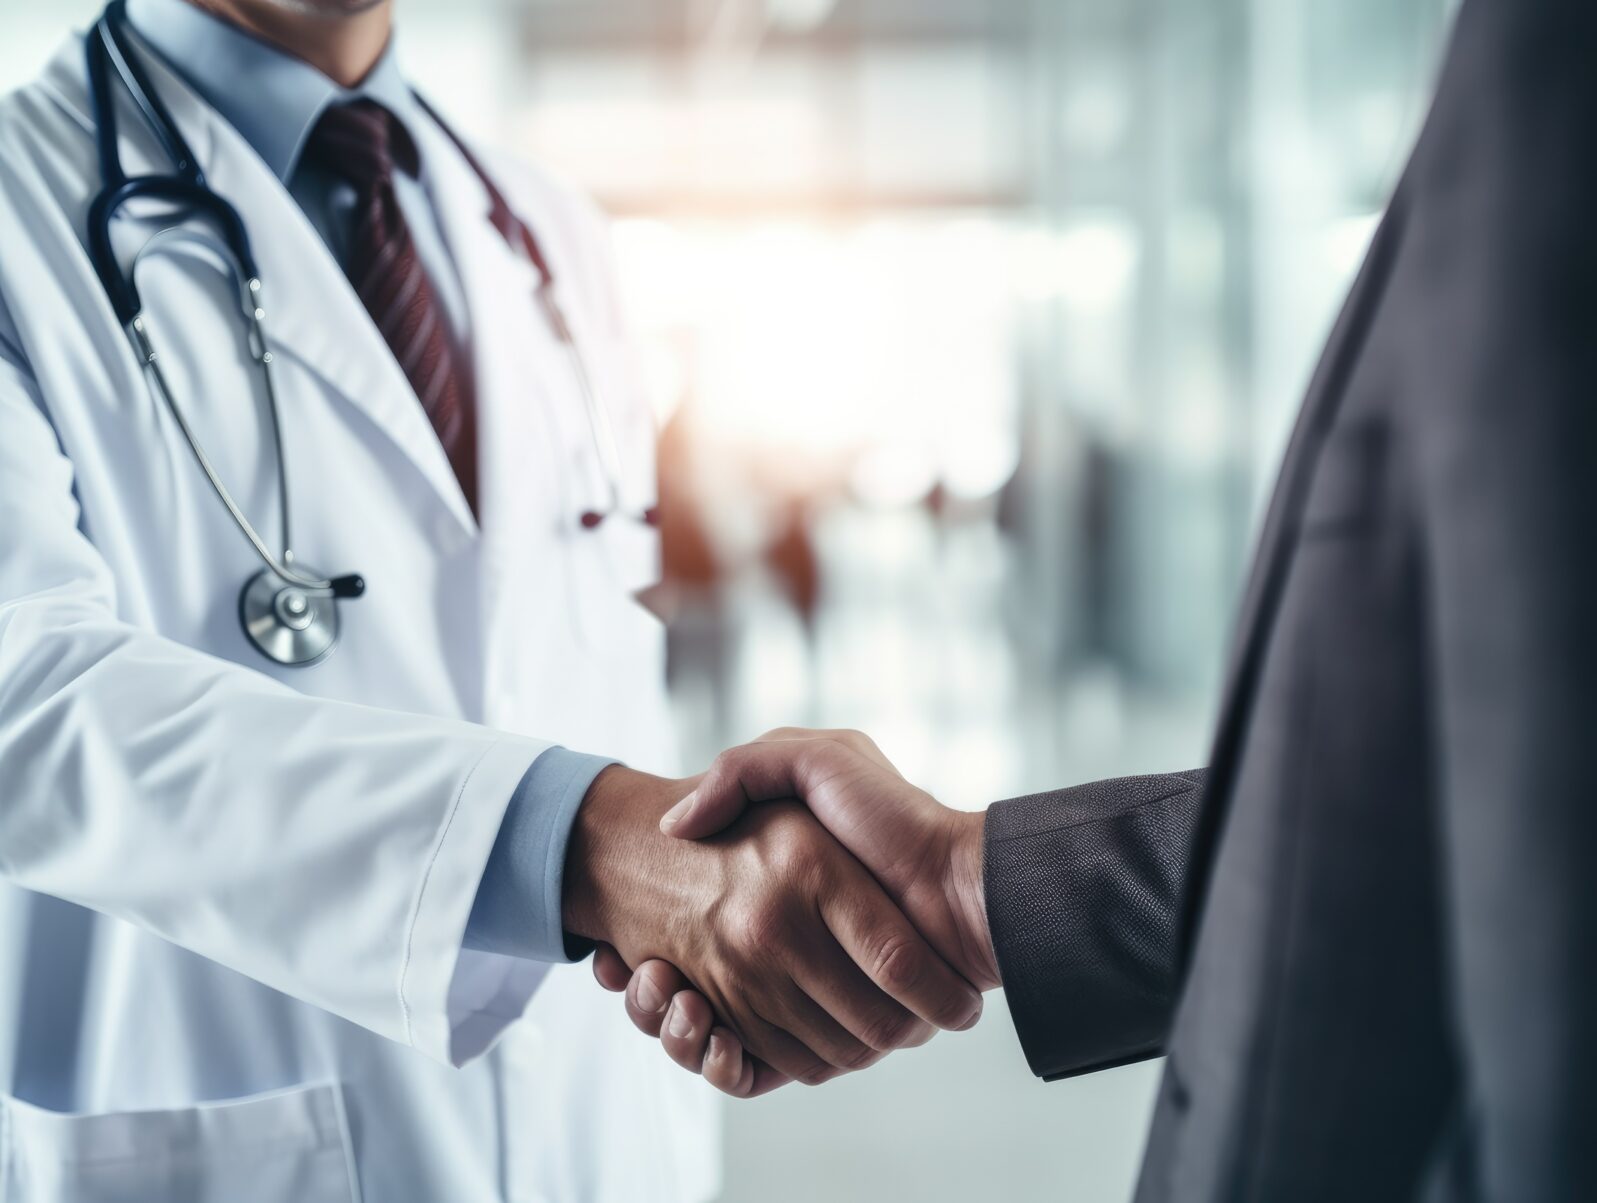 A close - up handshake between a doctor and a patient in a medical office with clean